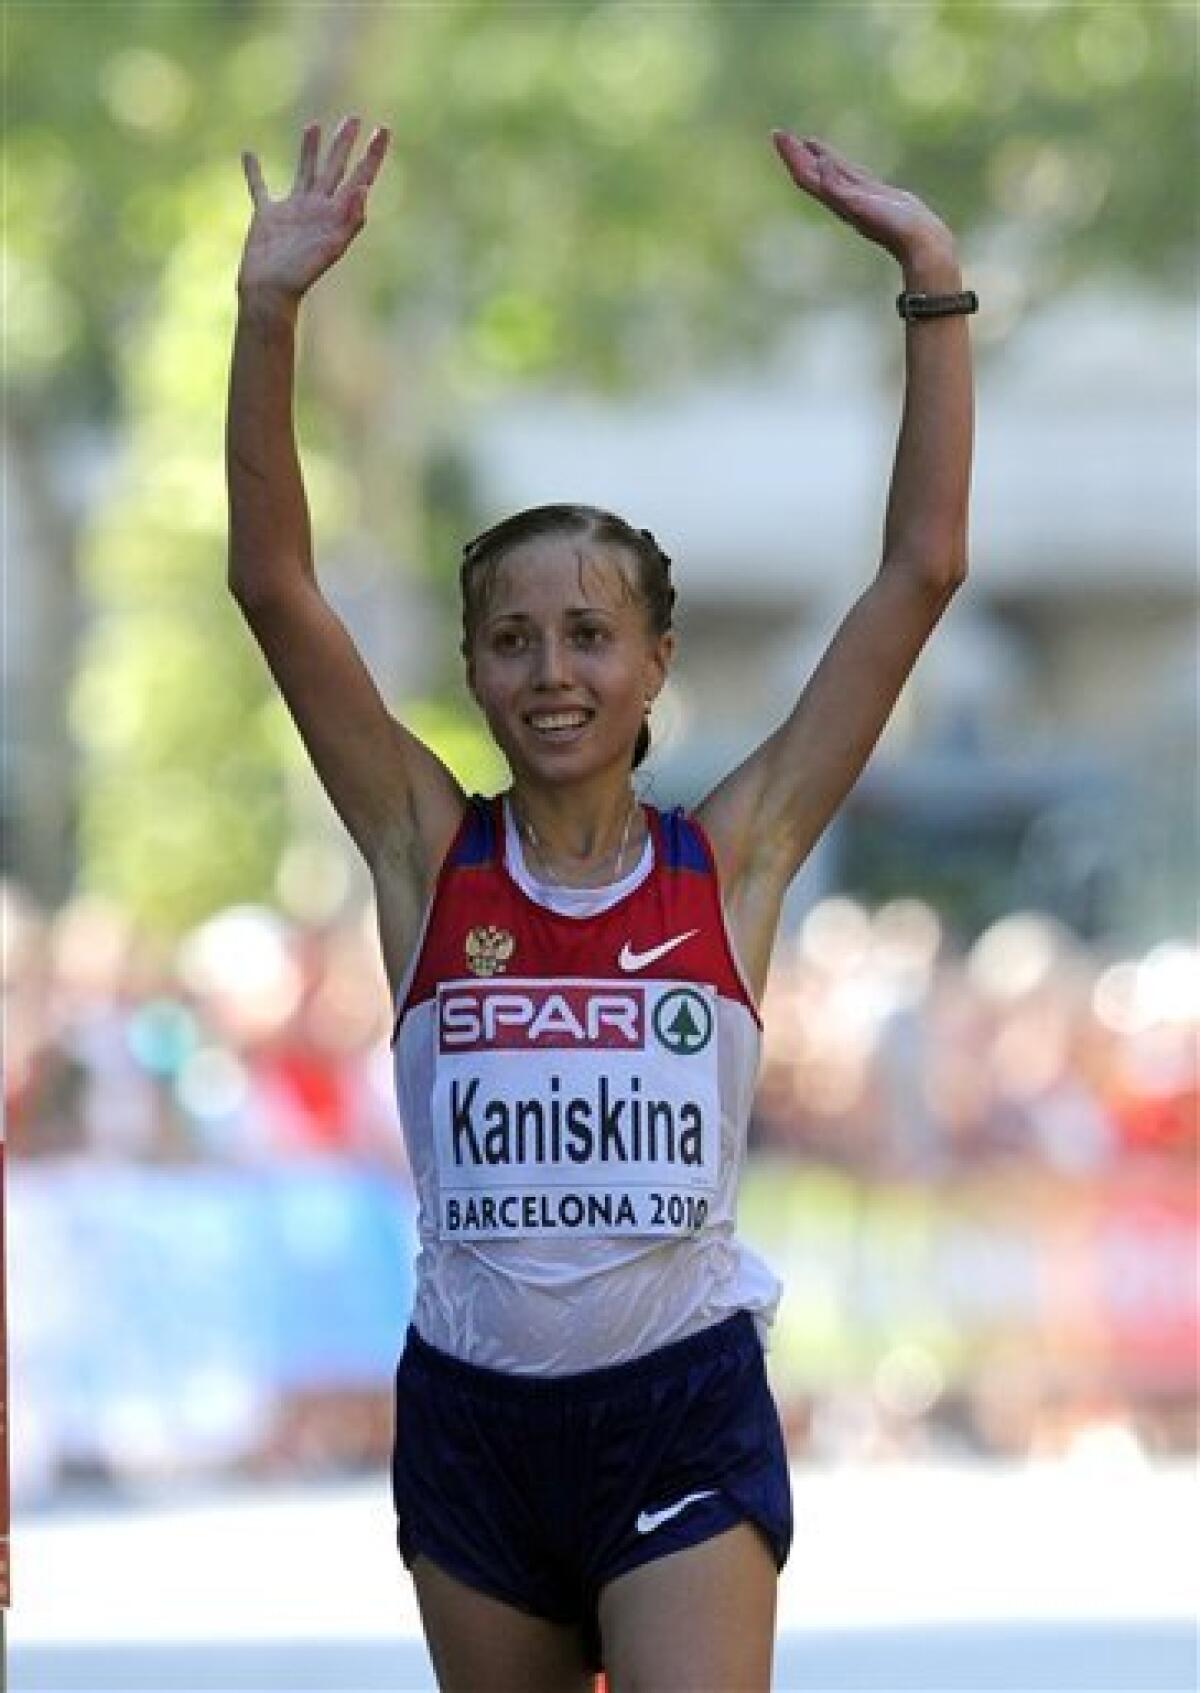 Russia's Olga Kaniskina reacts after winning the Women's 20km Race Walk during the European Athletics Championships, in Barcelona, Spain, Wednesday, July 28, 2010. (AP Photo/Manu Fernandez)